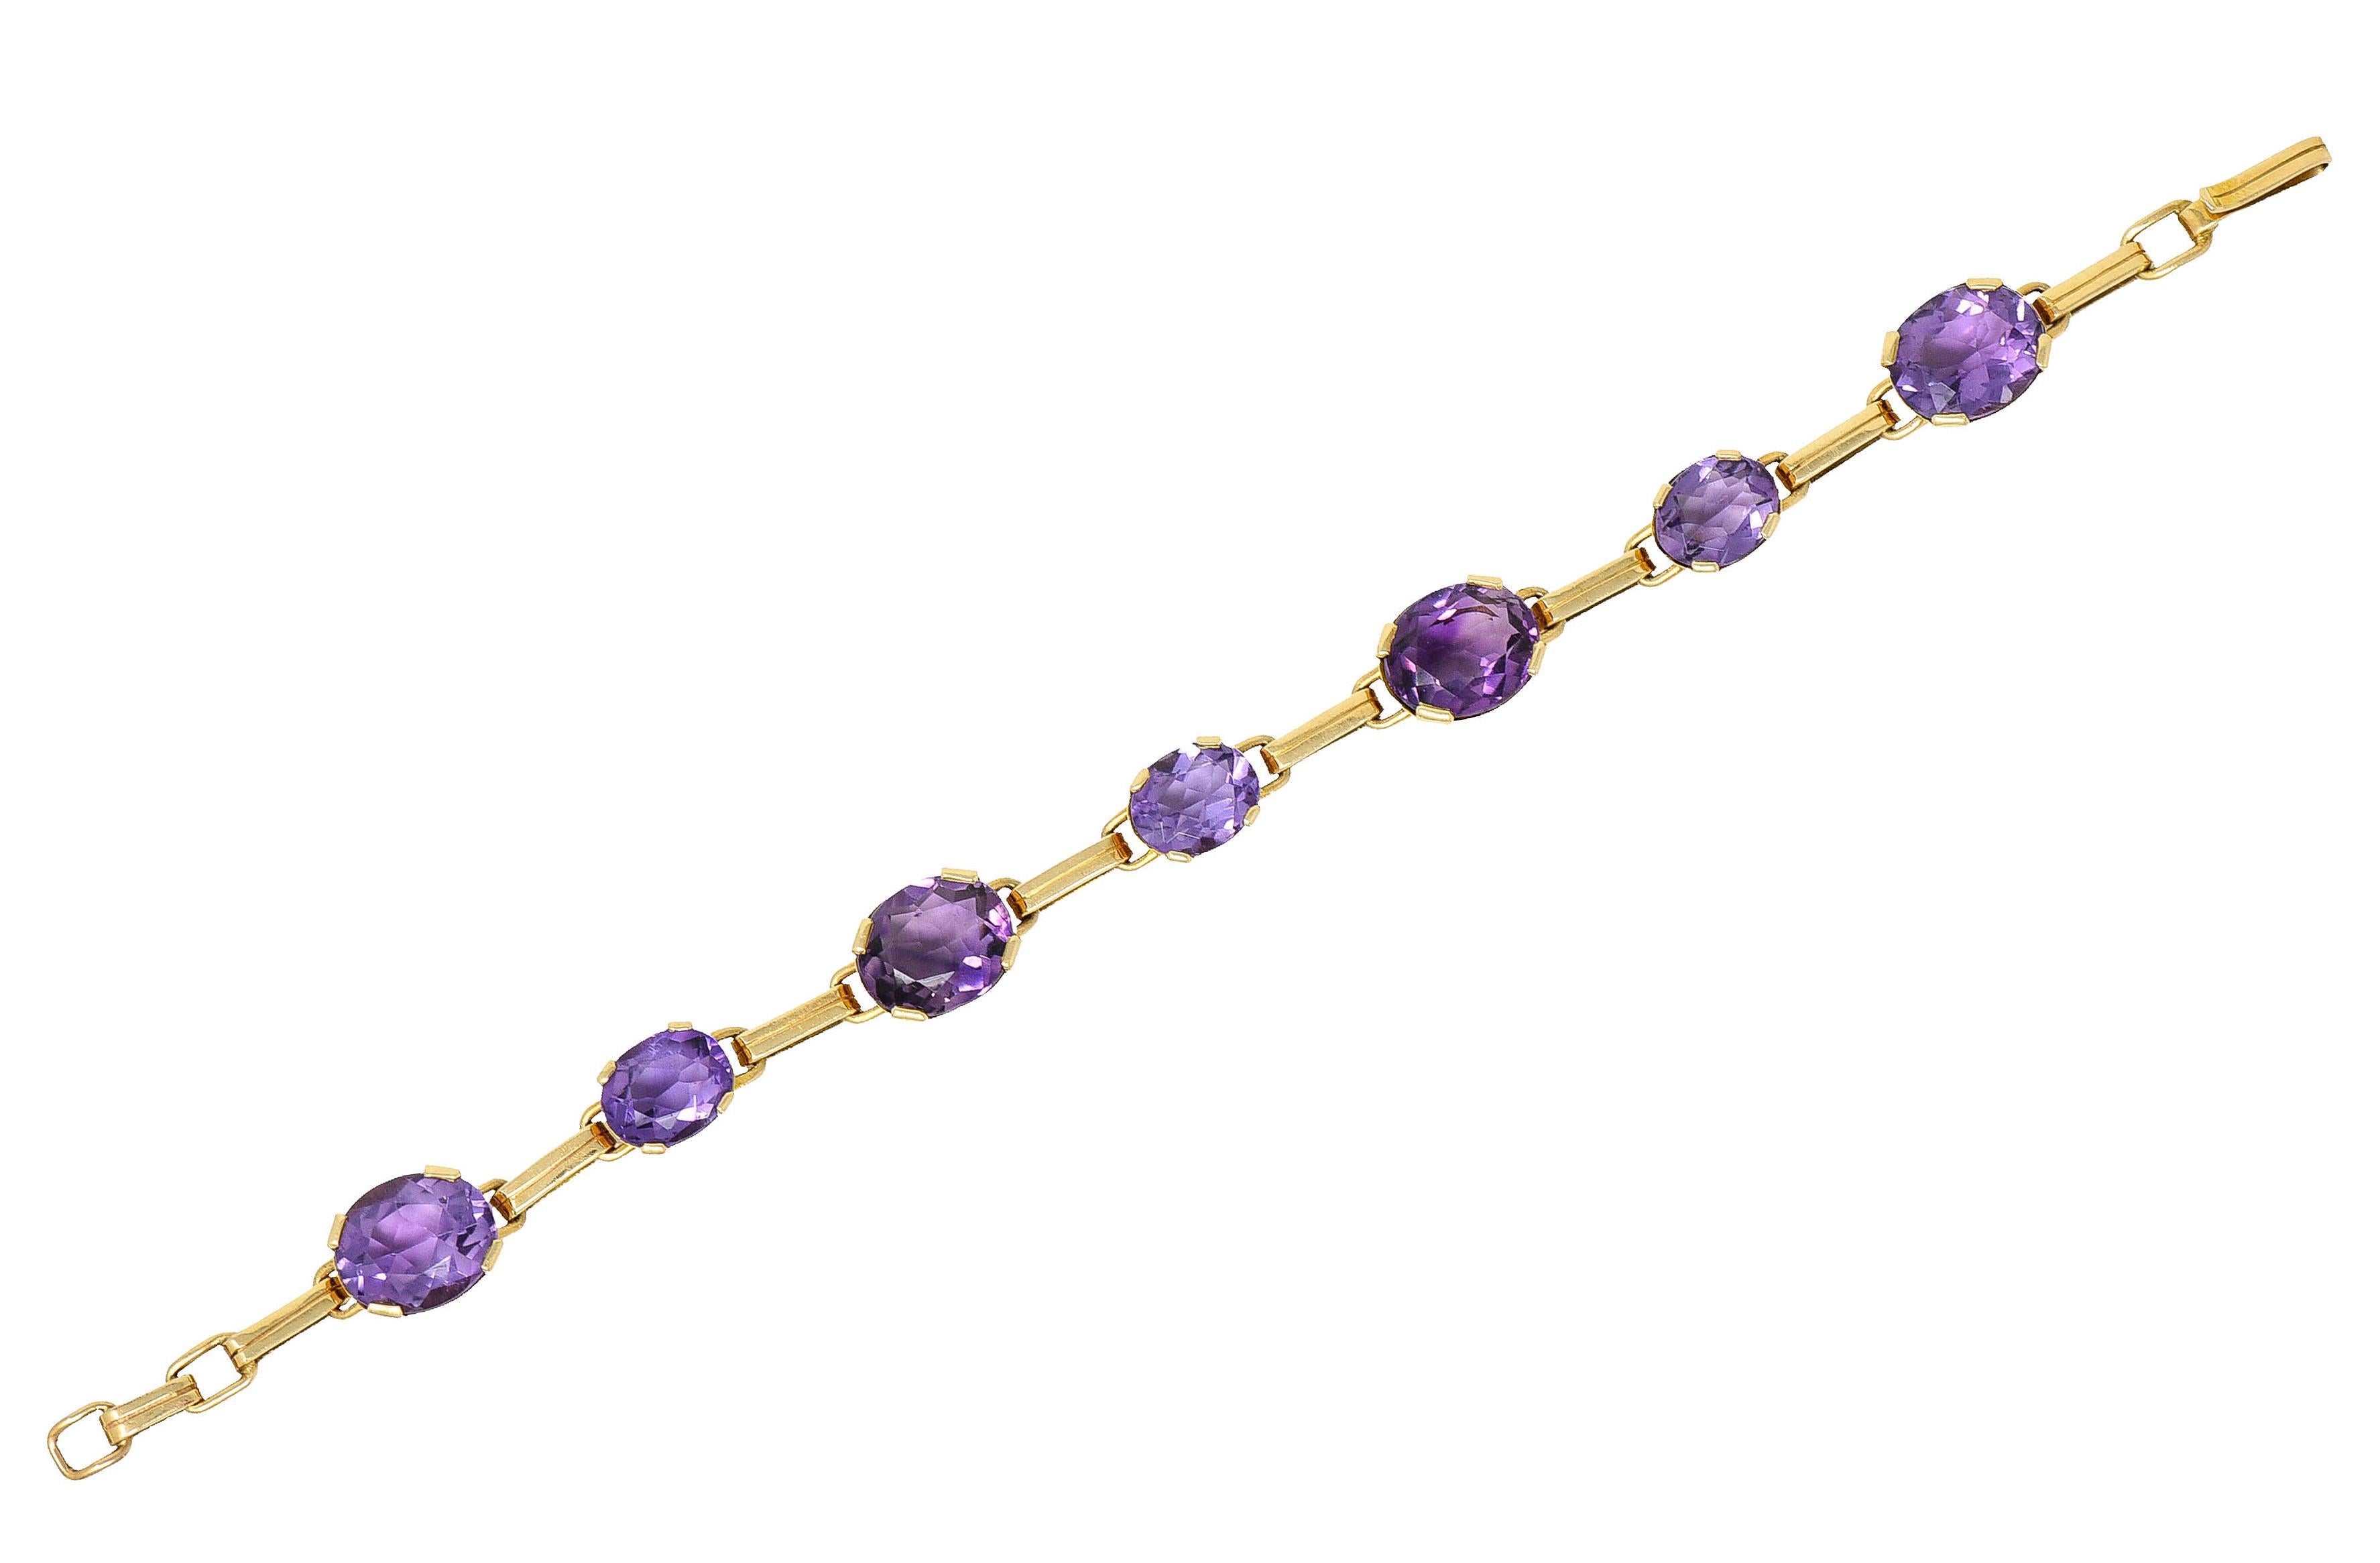 Designed as a link bracelet with oval amethyst cabochon stations

Amethyst measure 12.0 x 10.0 mm and 10.0 x 8.0 mm

Violetish purple hue with good saturation and very well matched

Each amethyst is basket set and alternates with bar spacer